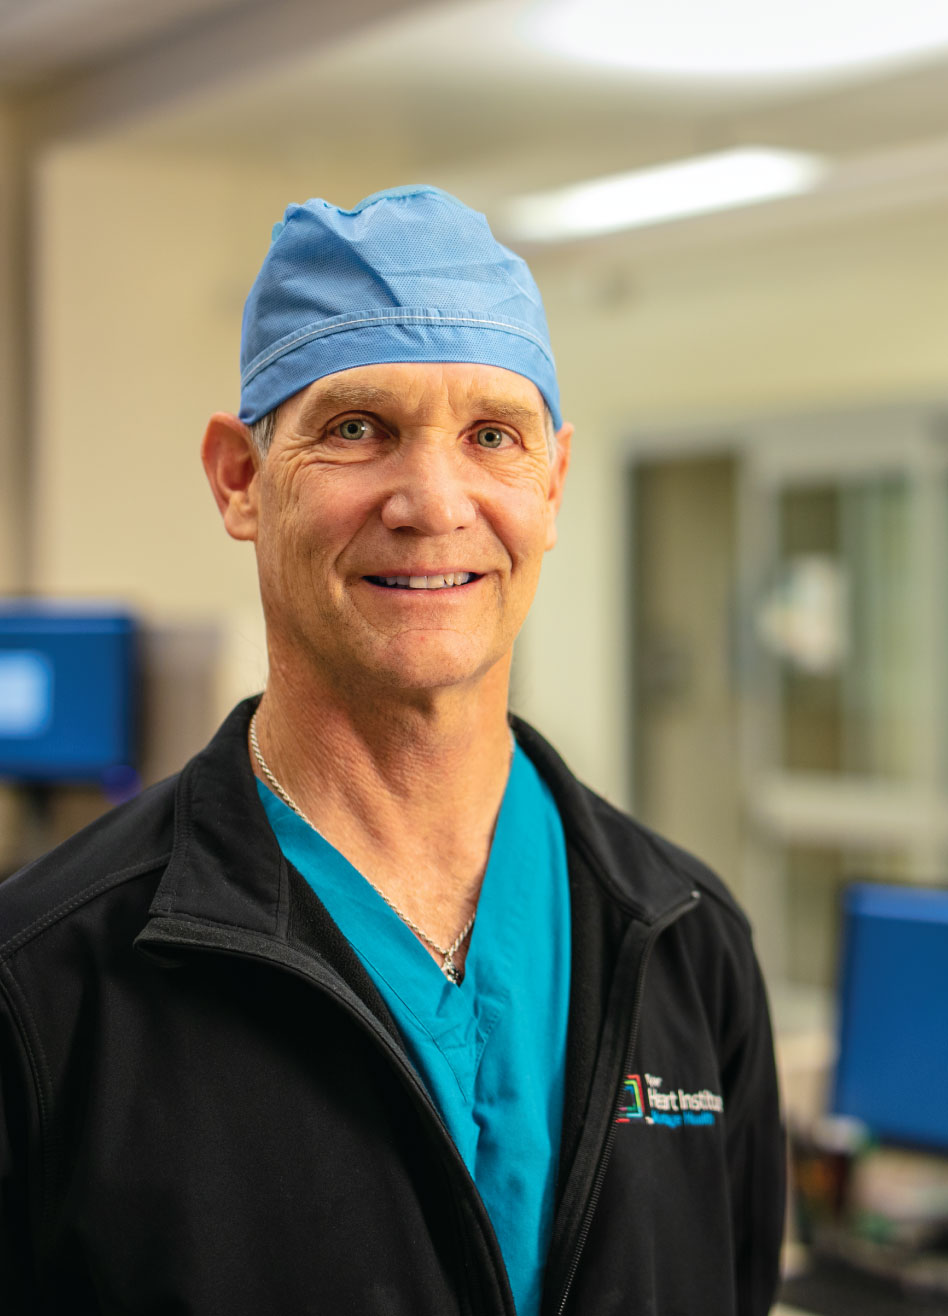 Gregory Spowart, MD, Cardiothoracic surgeon, Tyler Heart Institute, 10 years of service